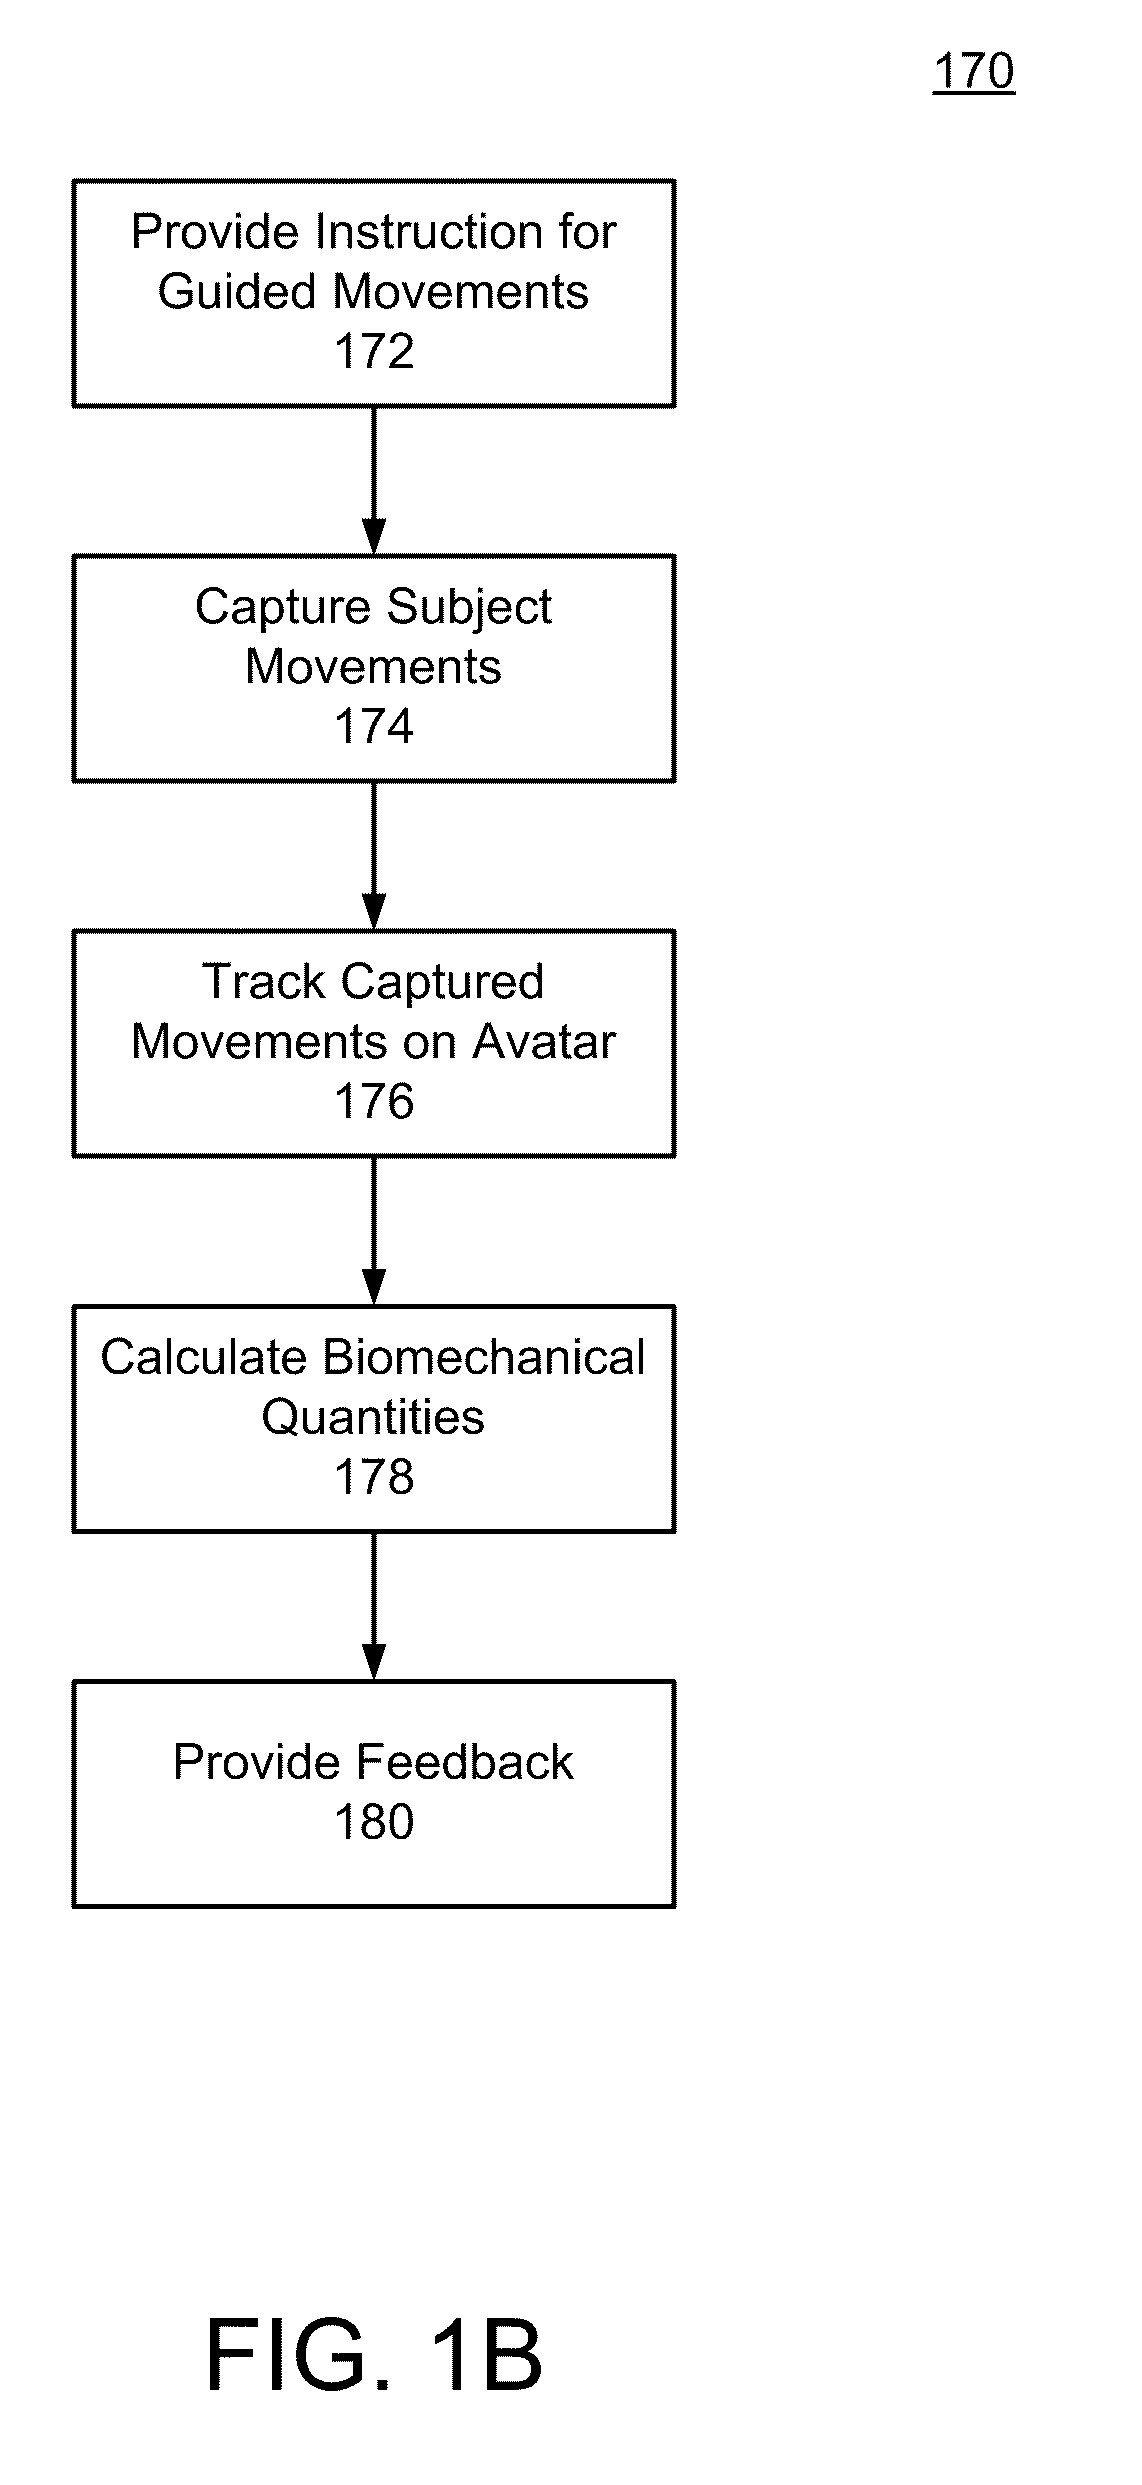 Vision Based Human Activity Recognition and Monitoring System for Guided Virtual Rehabilitation